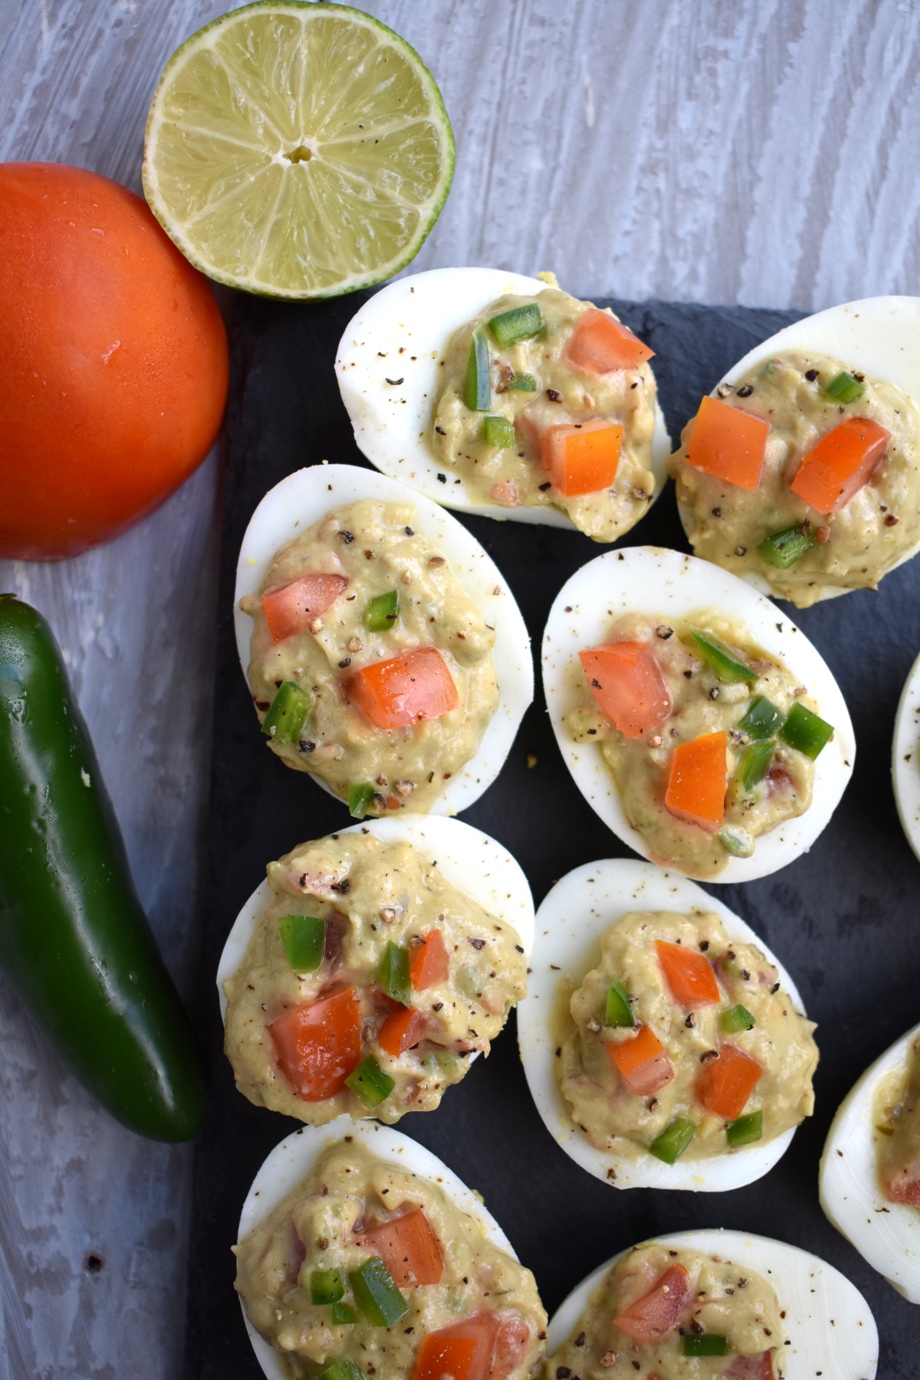 Guacamole Deviled Eggs is an awesome appetizer that features hard boiled egg whites filled with flavorful guacamole with jalapeno and tomatoes. www.nutritionistreviews.com